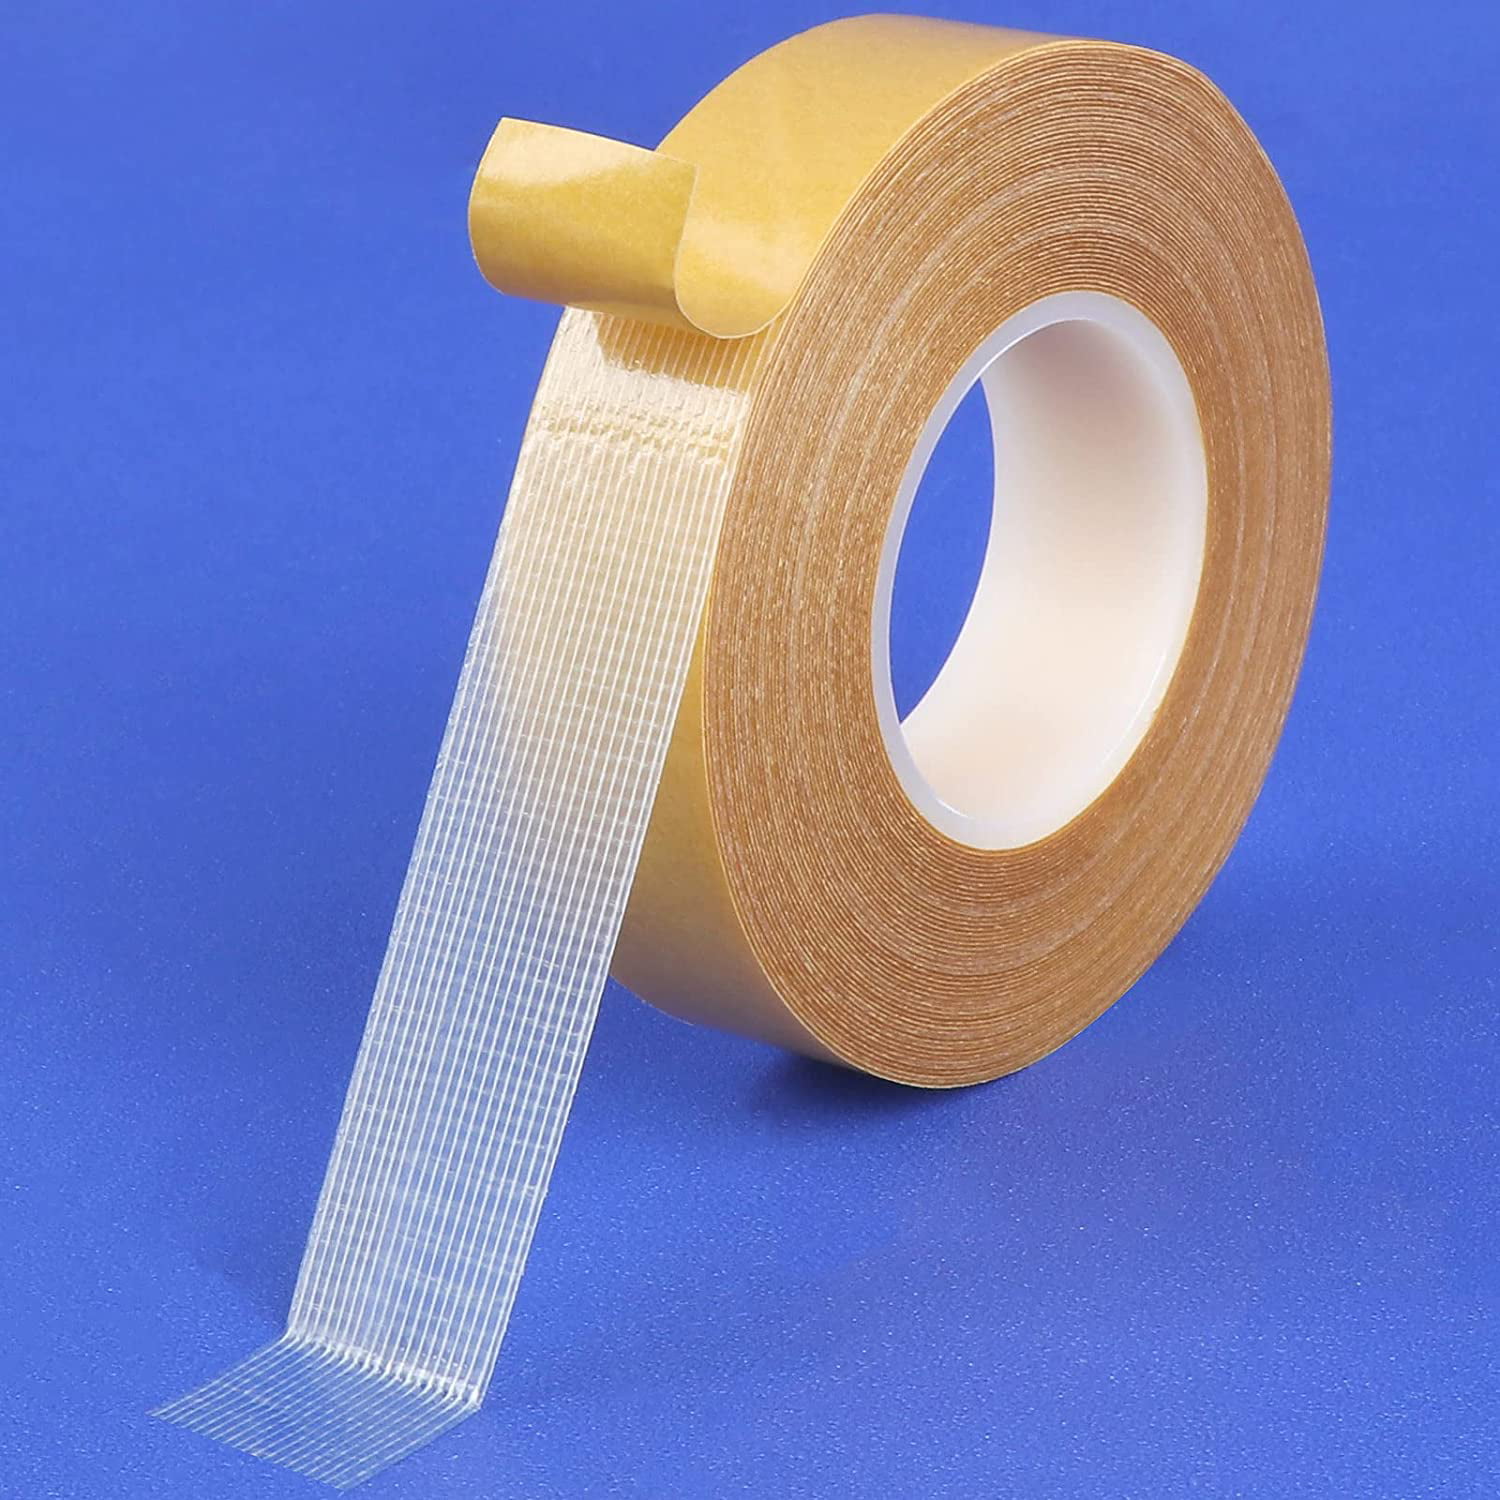 Double Sided Clear Mounting Tape 1.2 inch Wide, 9.8' Long Acrylic Gel Tape for Temps 0-100, Heavy Duty Multipurpose by KapStrom, Size: 3M